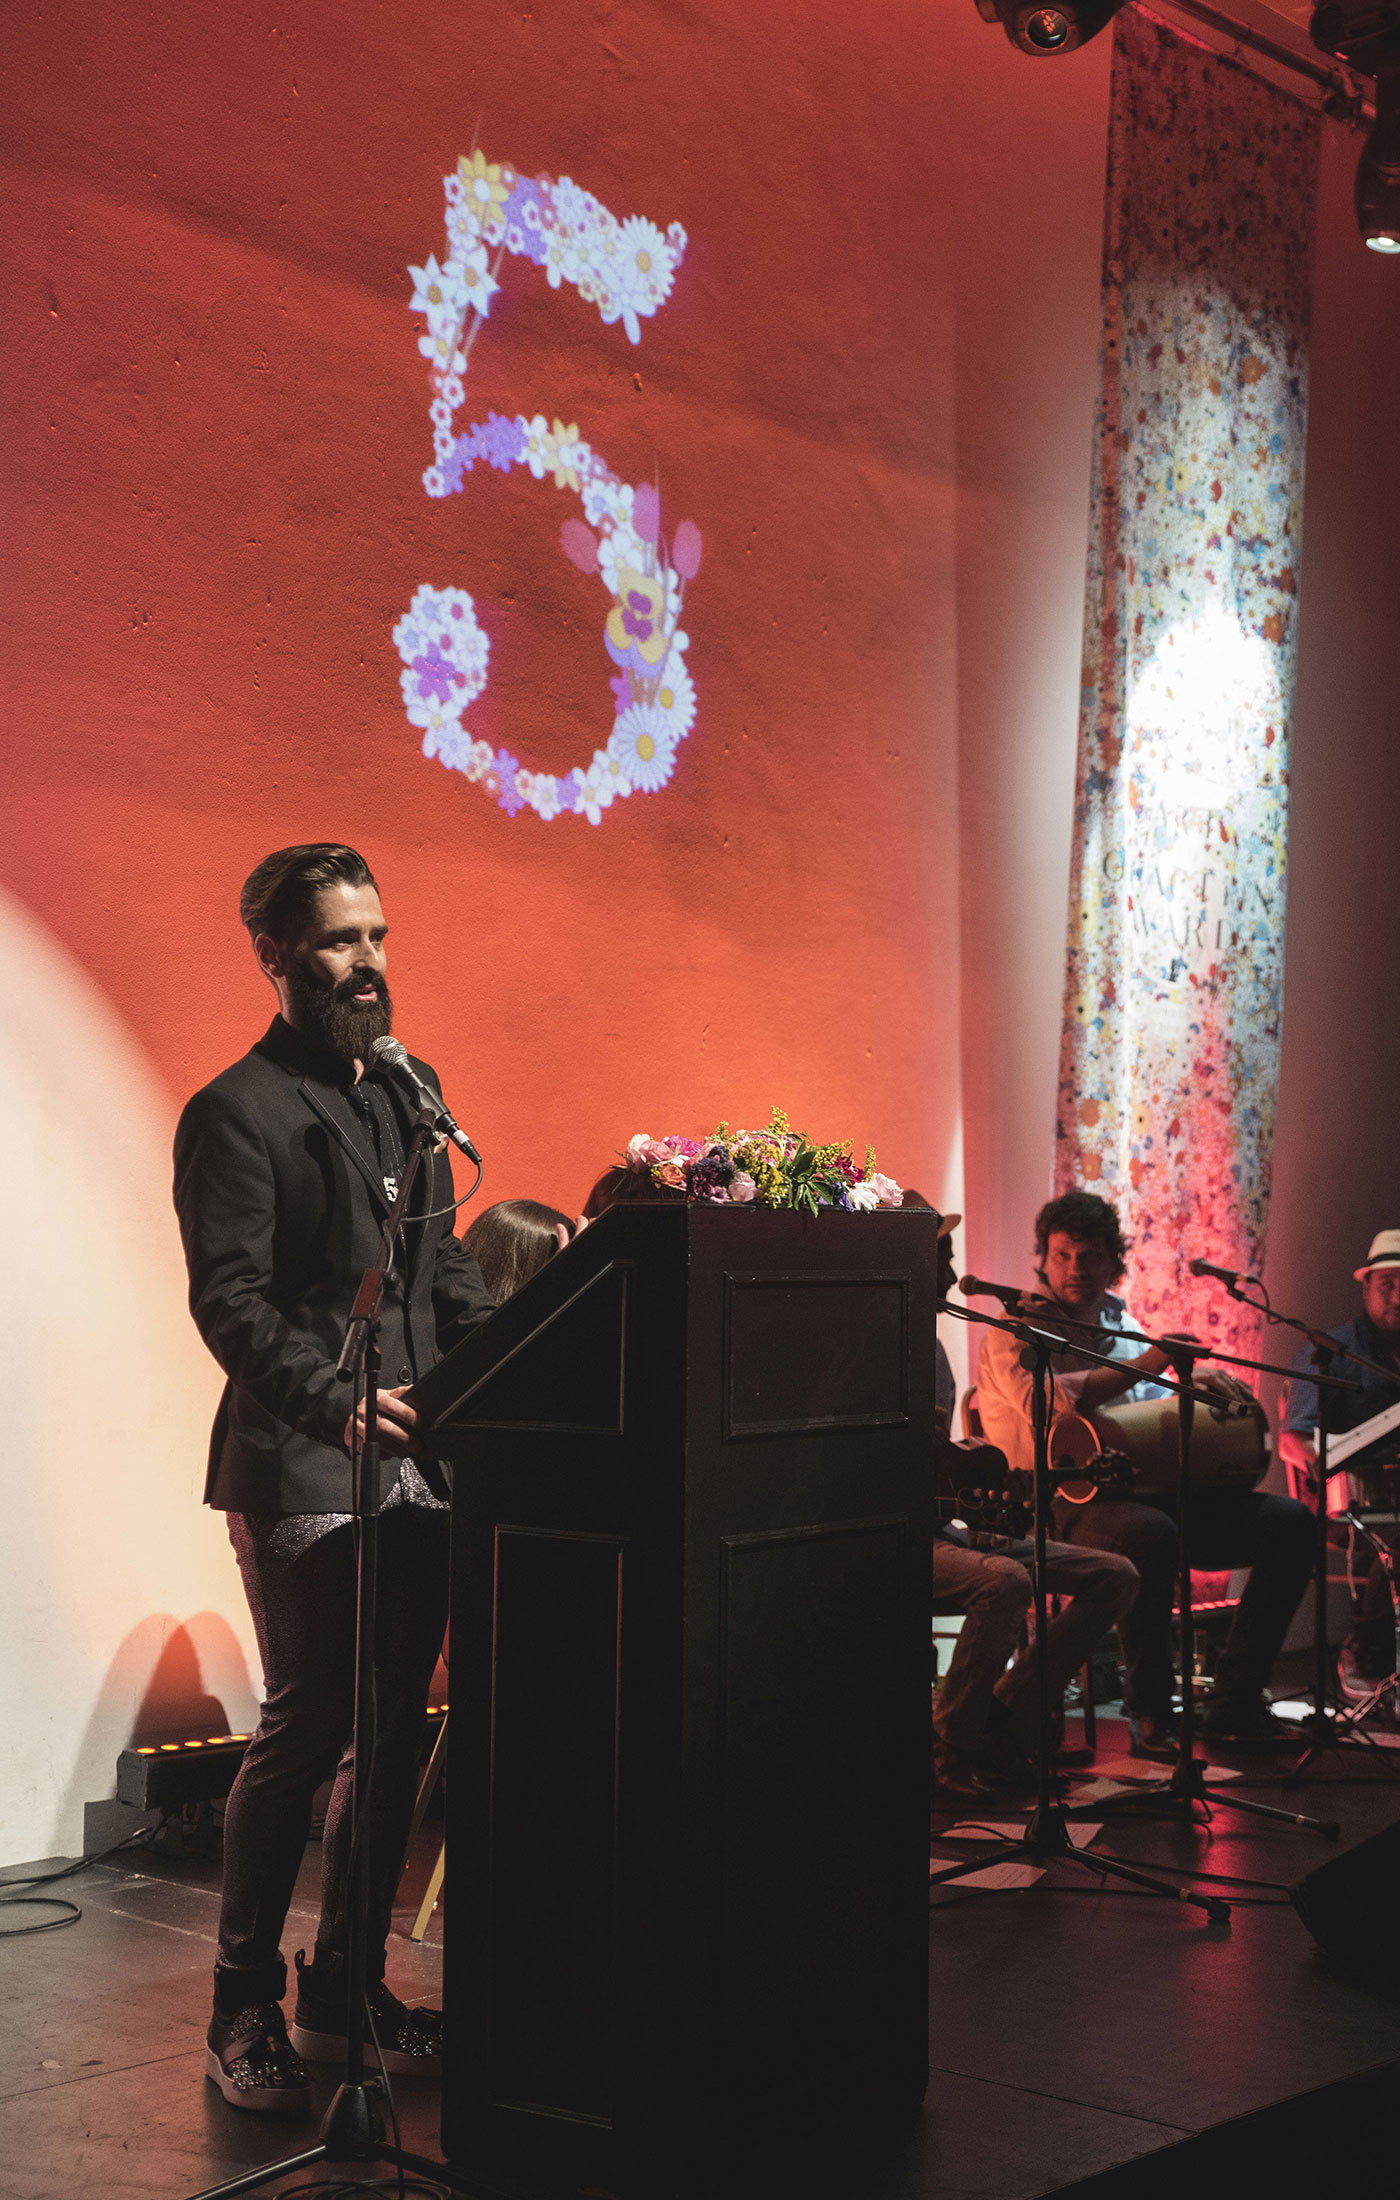 Miguel Matos at The Art and Olfaction Awards, Photo by Marina Chichi